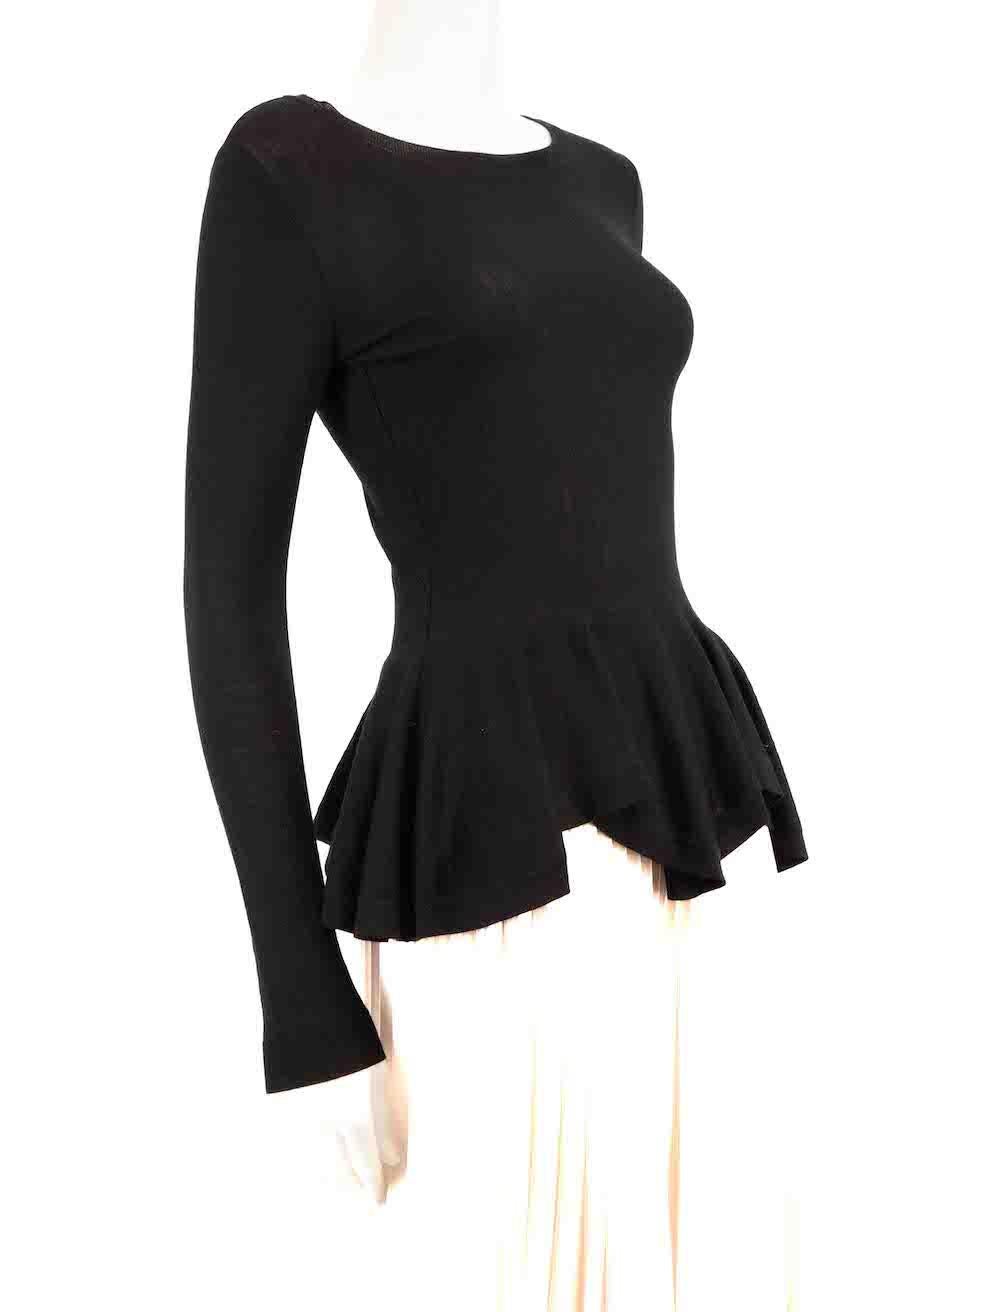 CONDITION is Very good. Hardly any visible wear to top is evident on this used Alexander McQueen designer resale item.
 
 Details
 Black
 Wool
 Knit top
 Long sleeves
 Ruffled peplum hem
 Round neck
 Stretchy
 
 
 Made in Italy
 
 Composition
 100%